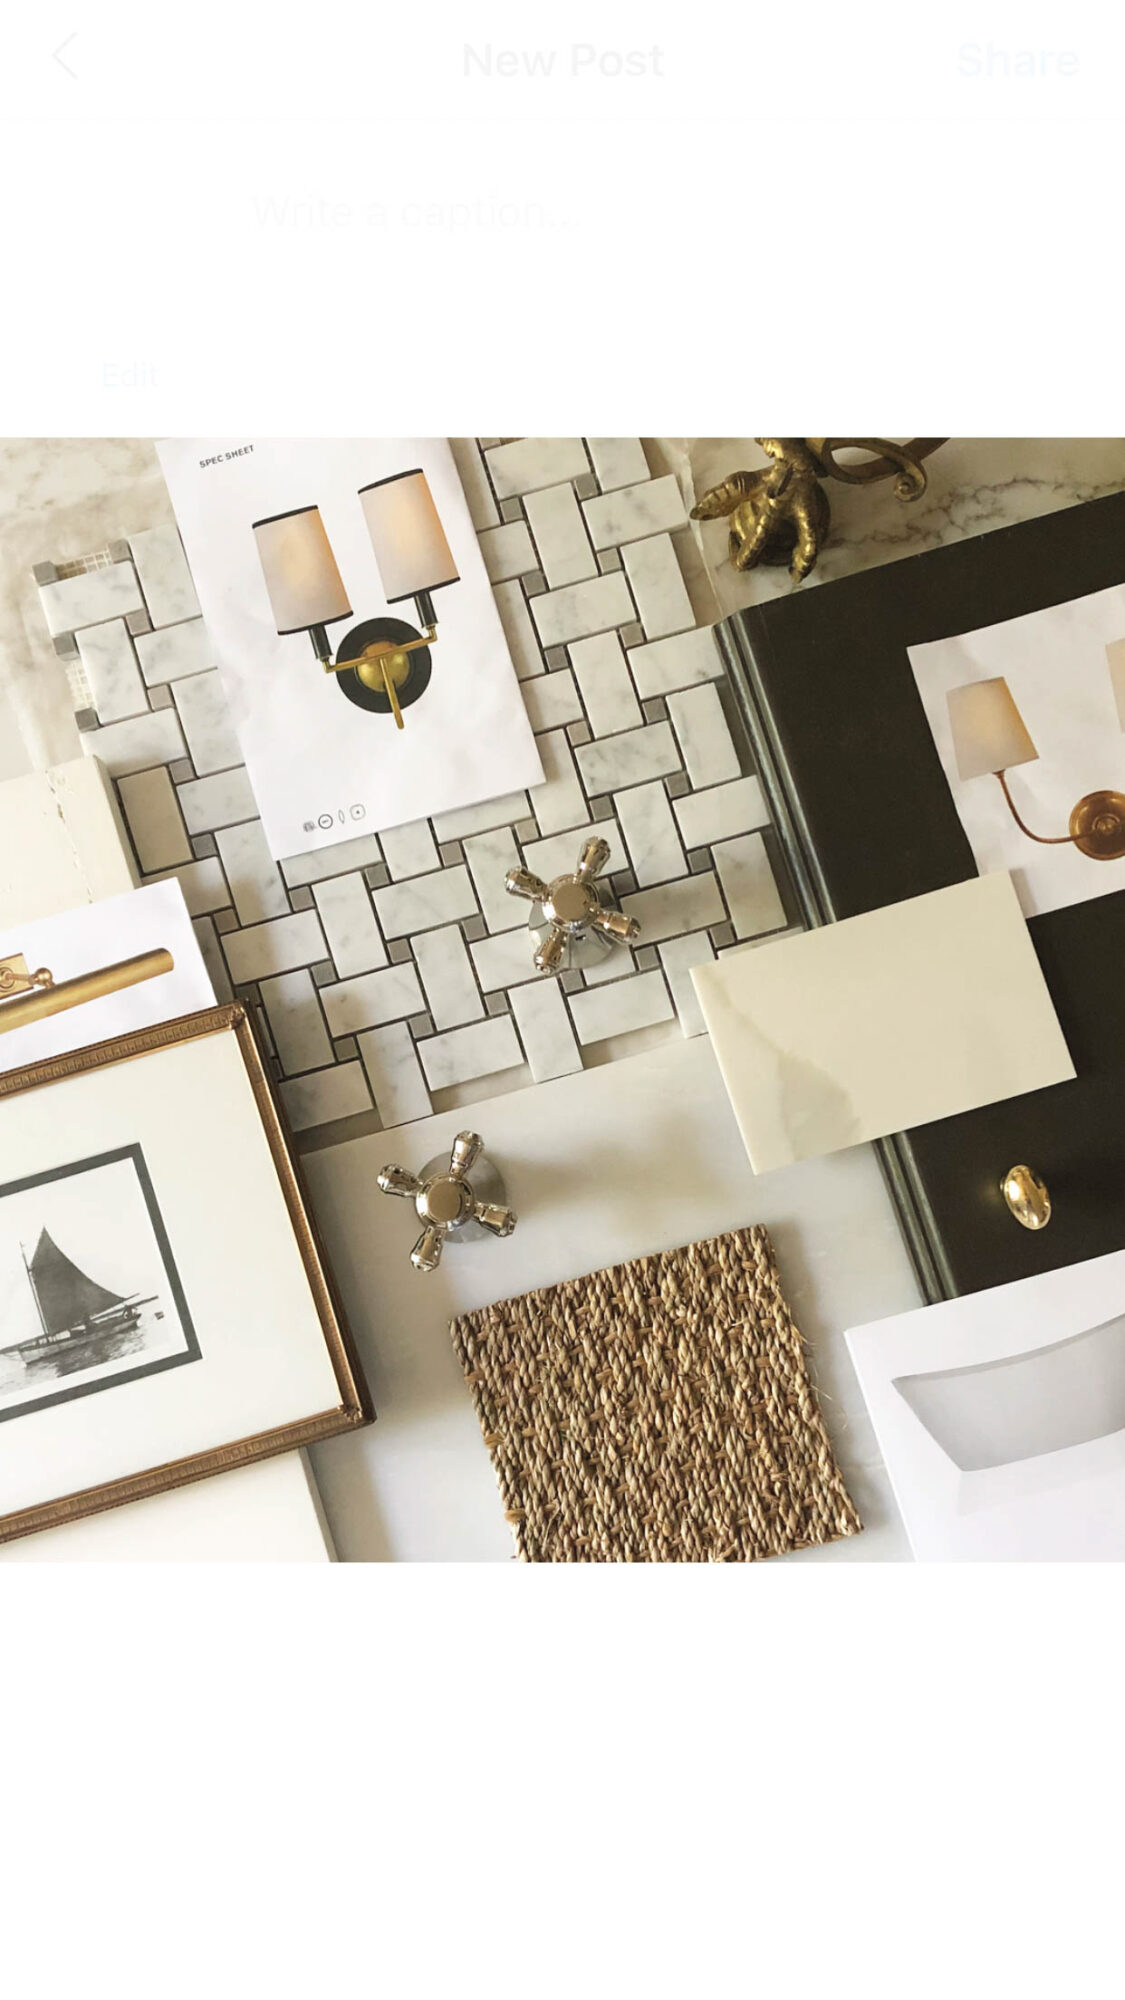 swatches of tile samples and other accessories